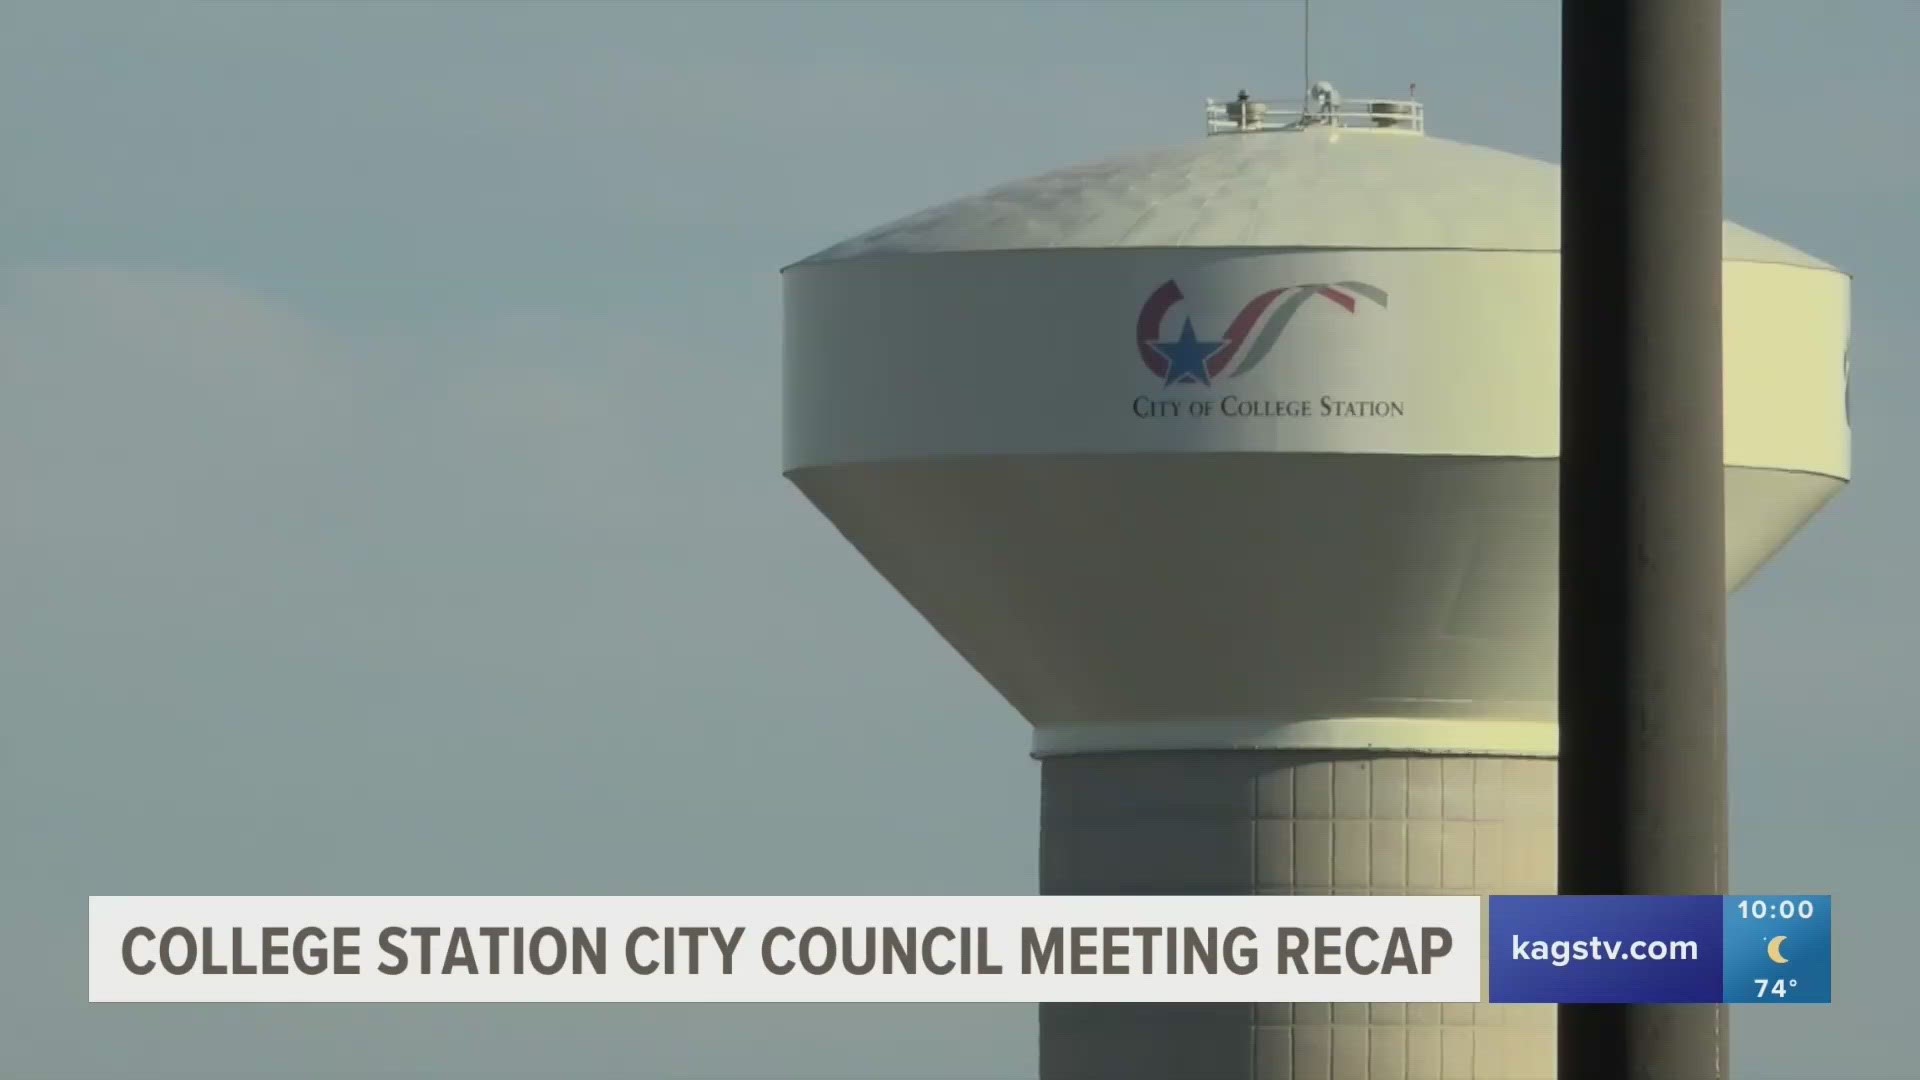 Among the many things discussed at the meeting, a change to housing restrictions and an update to phase four of a prospective sewer line were the most significant.